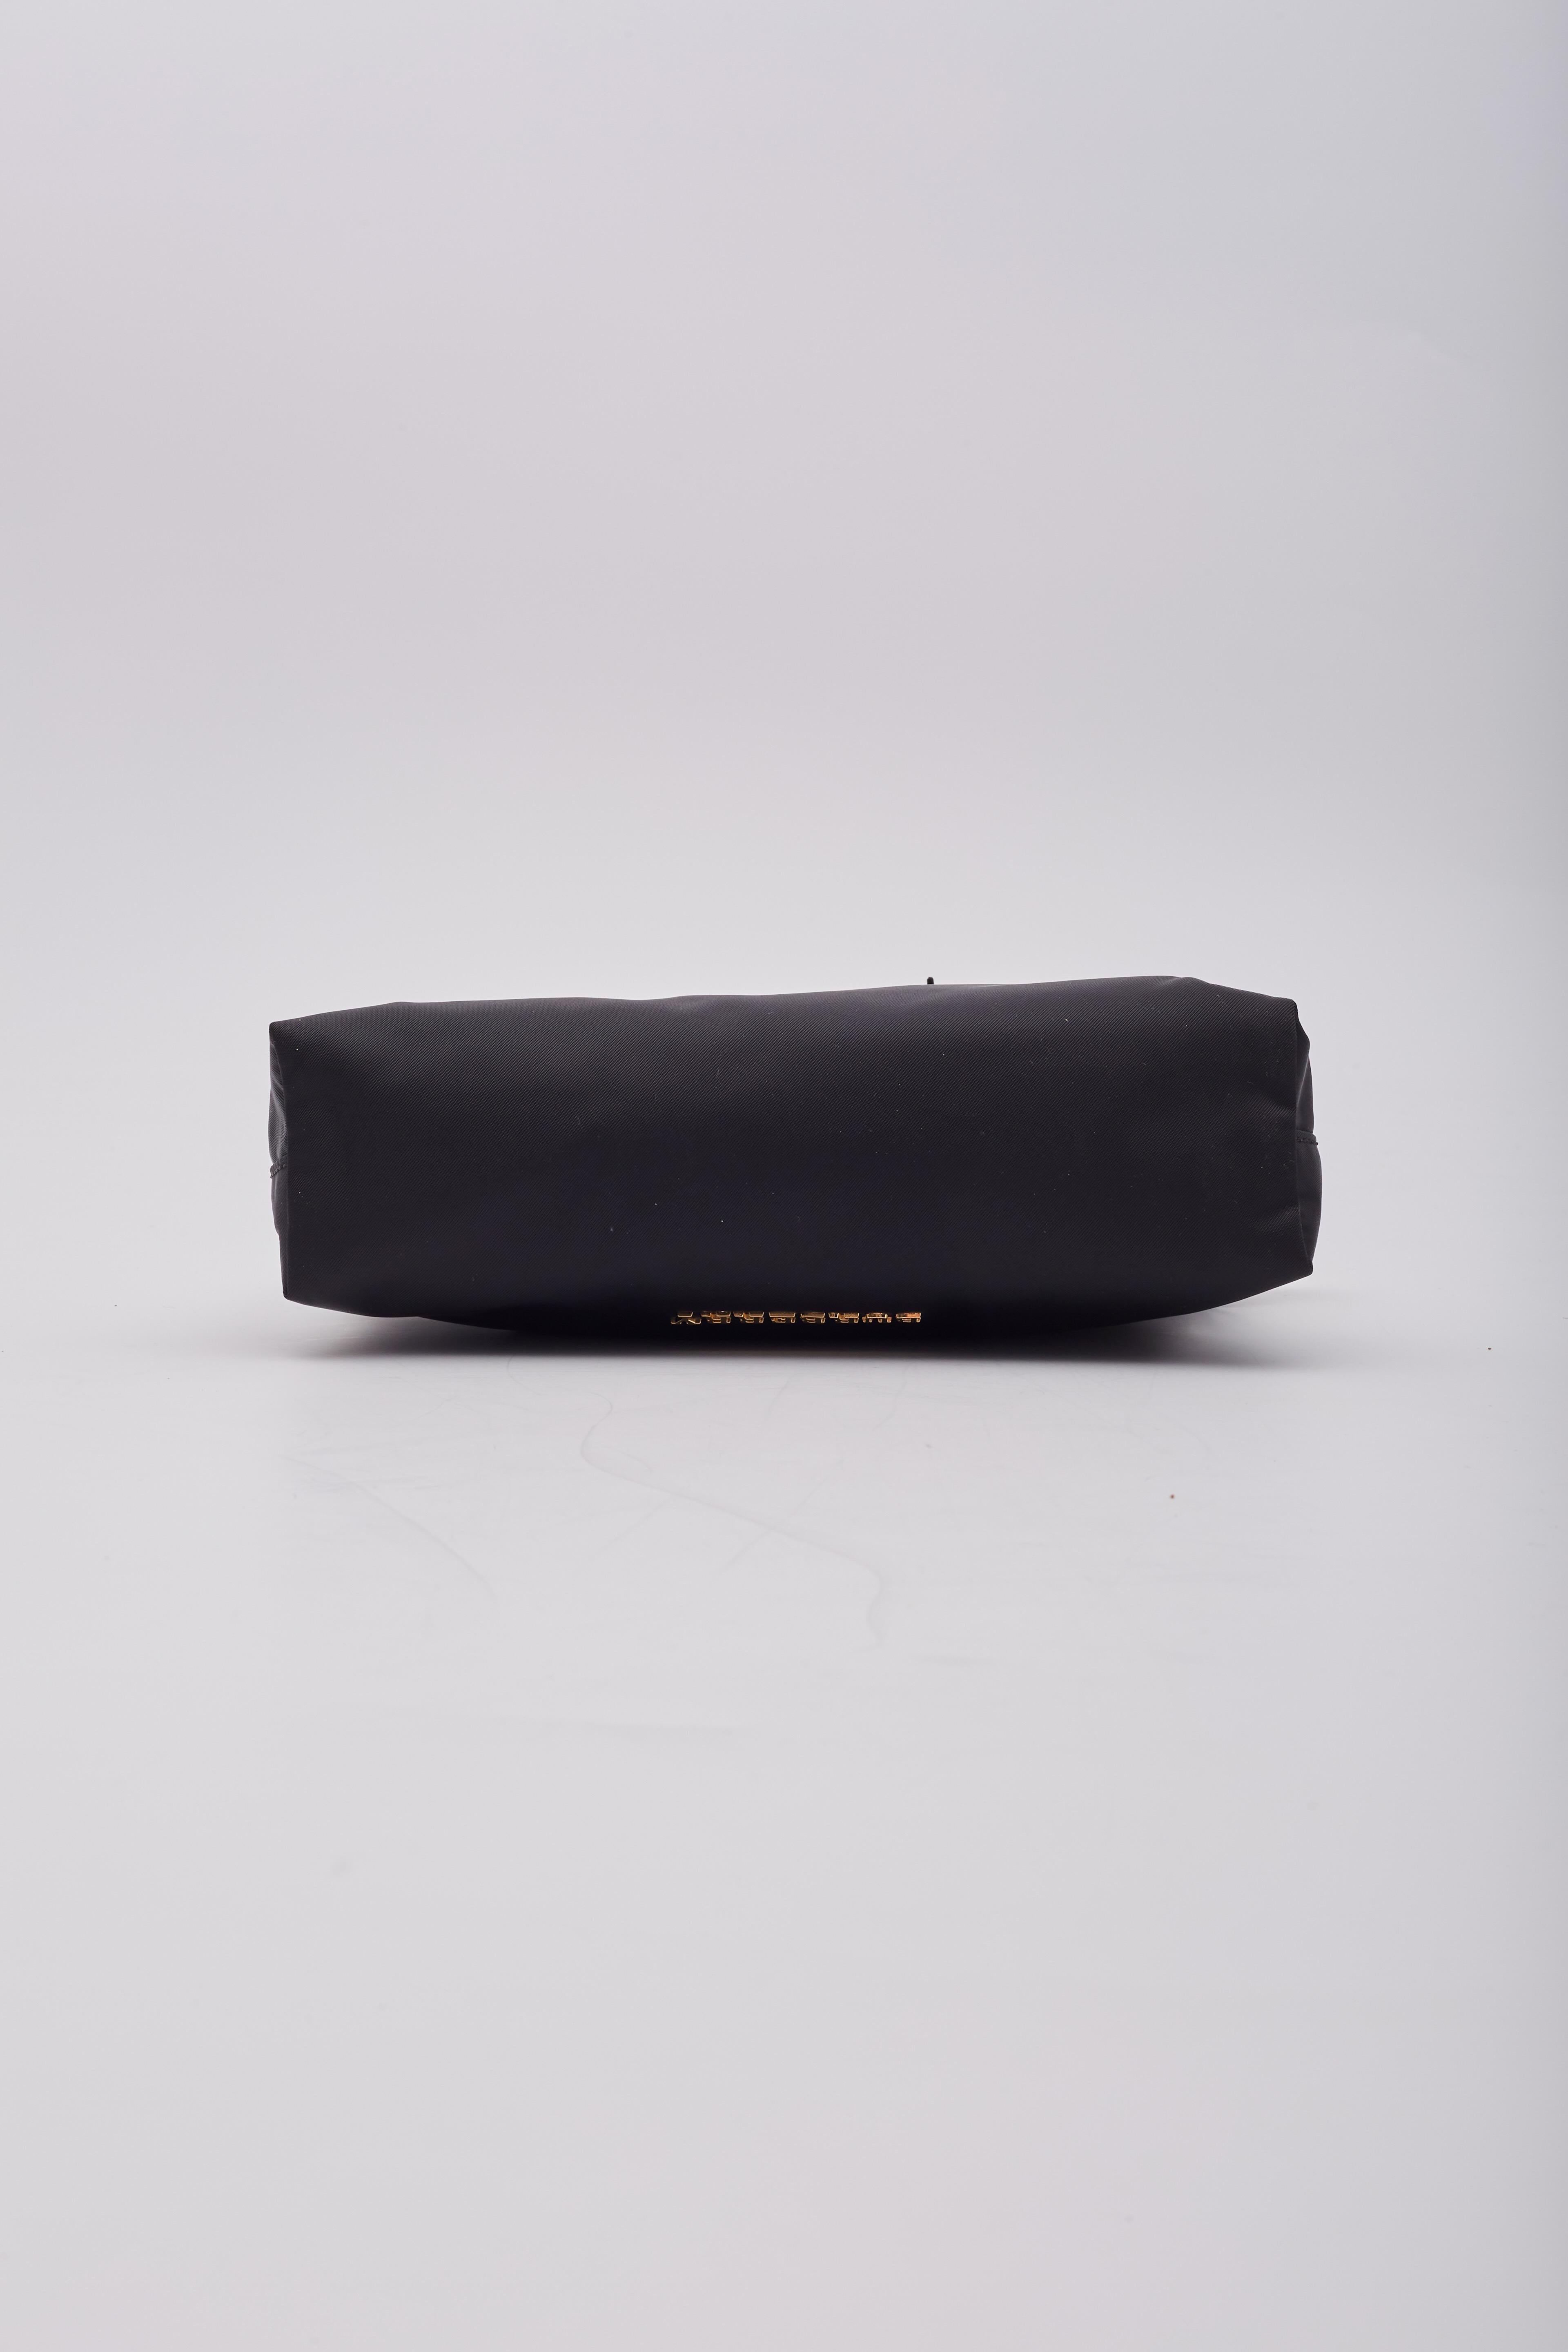 Burberry Black Nylon Technical Vanity Pouch Small For Sale 2